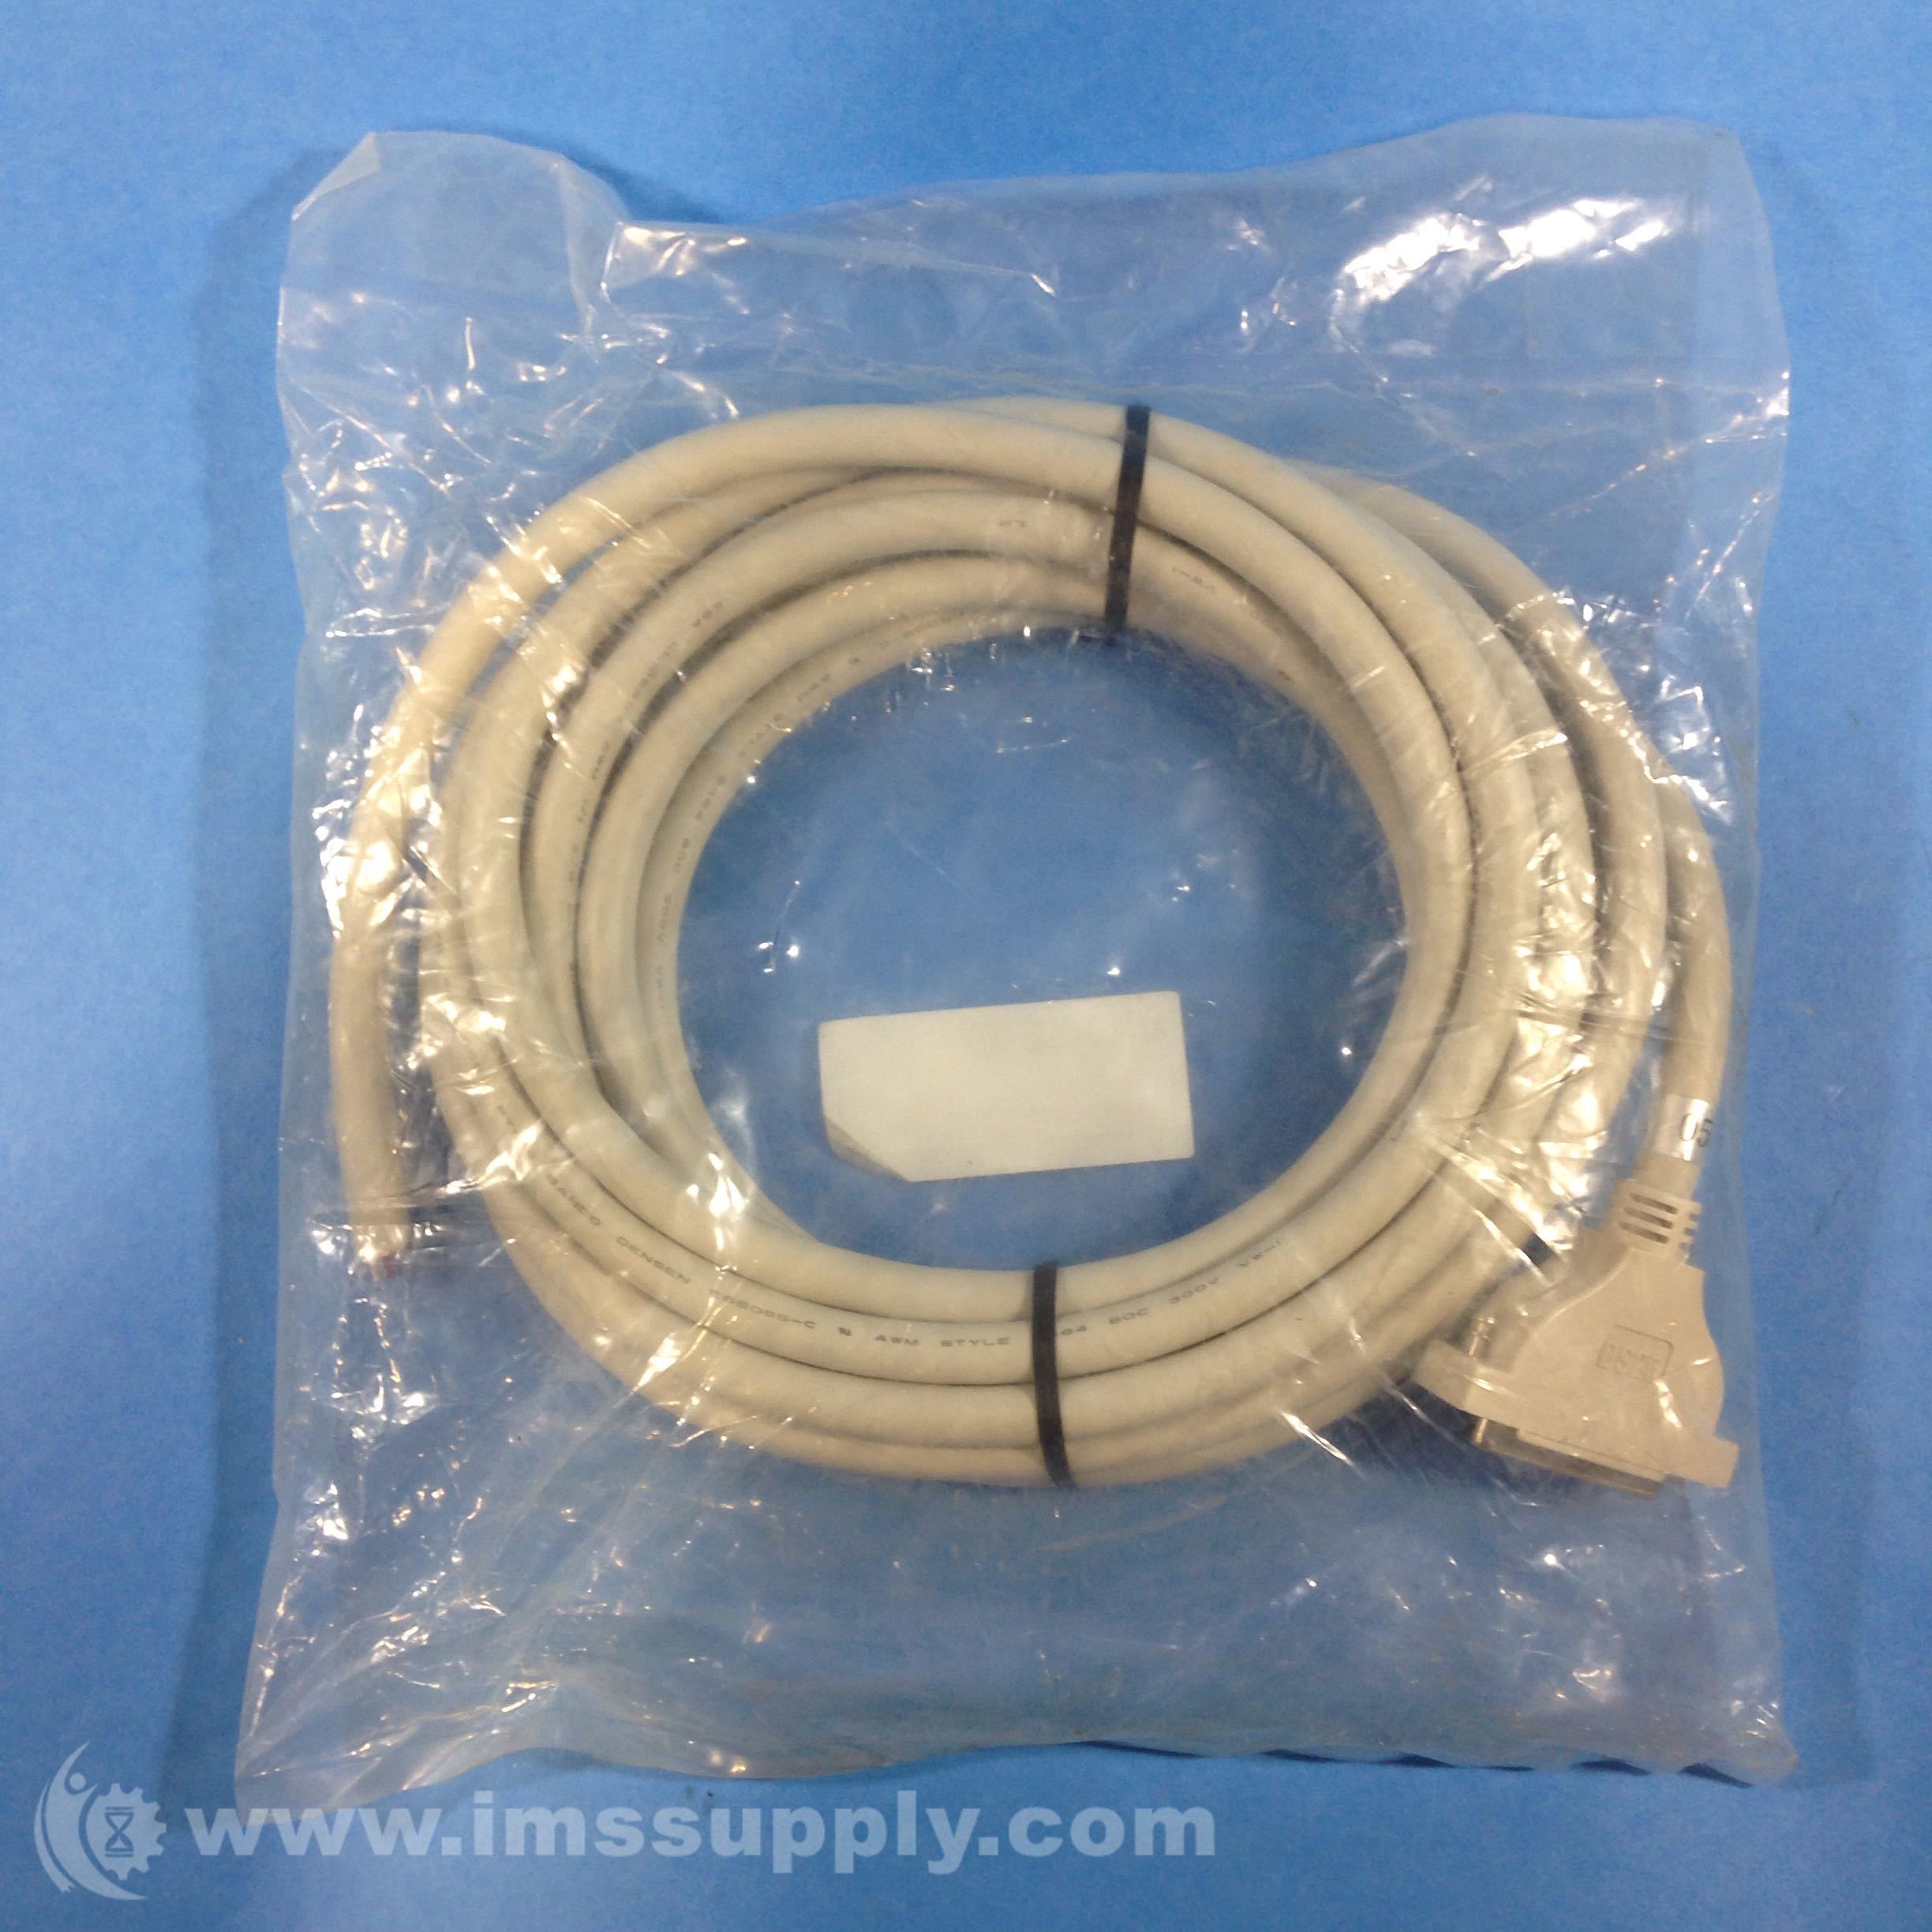 SMC Cable AXT100-DS25-050 